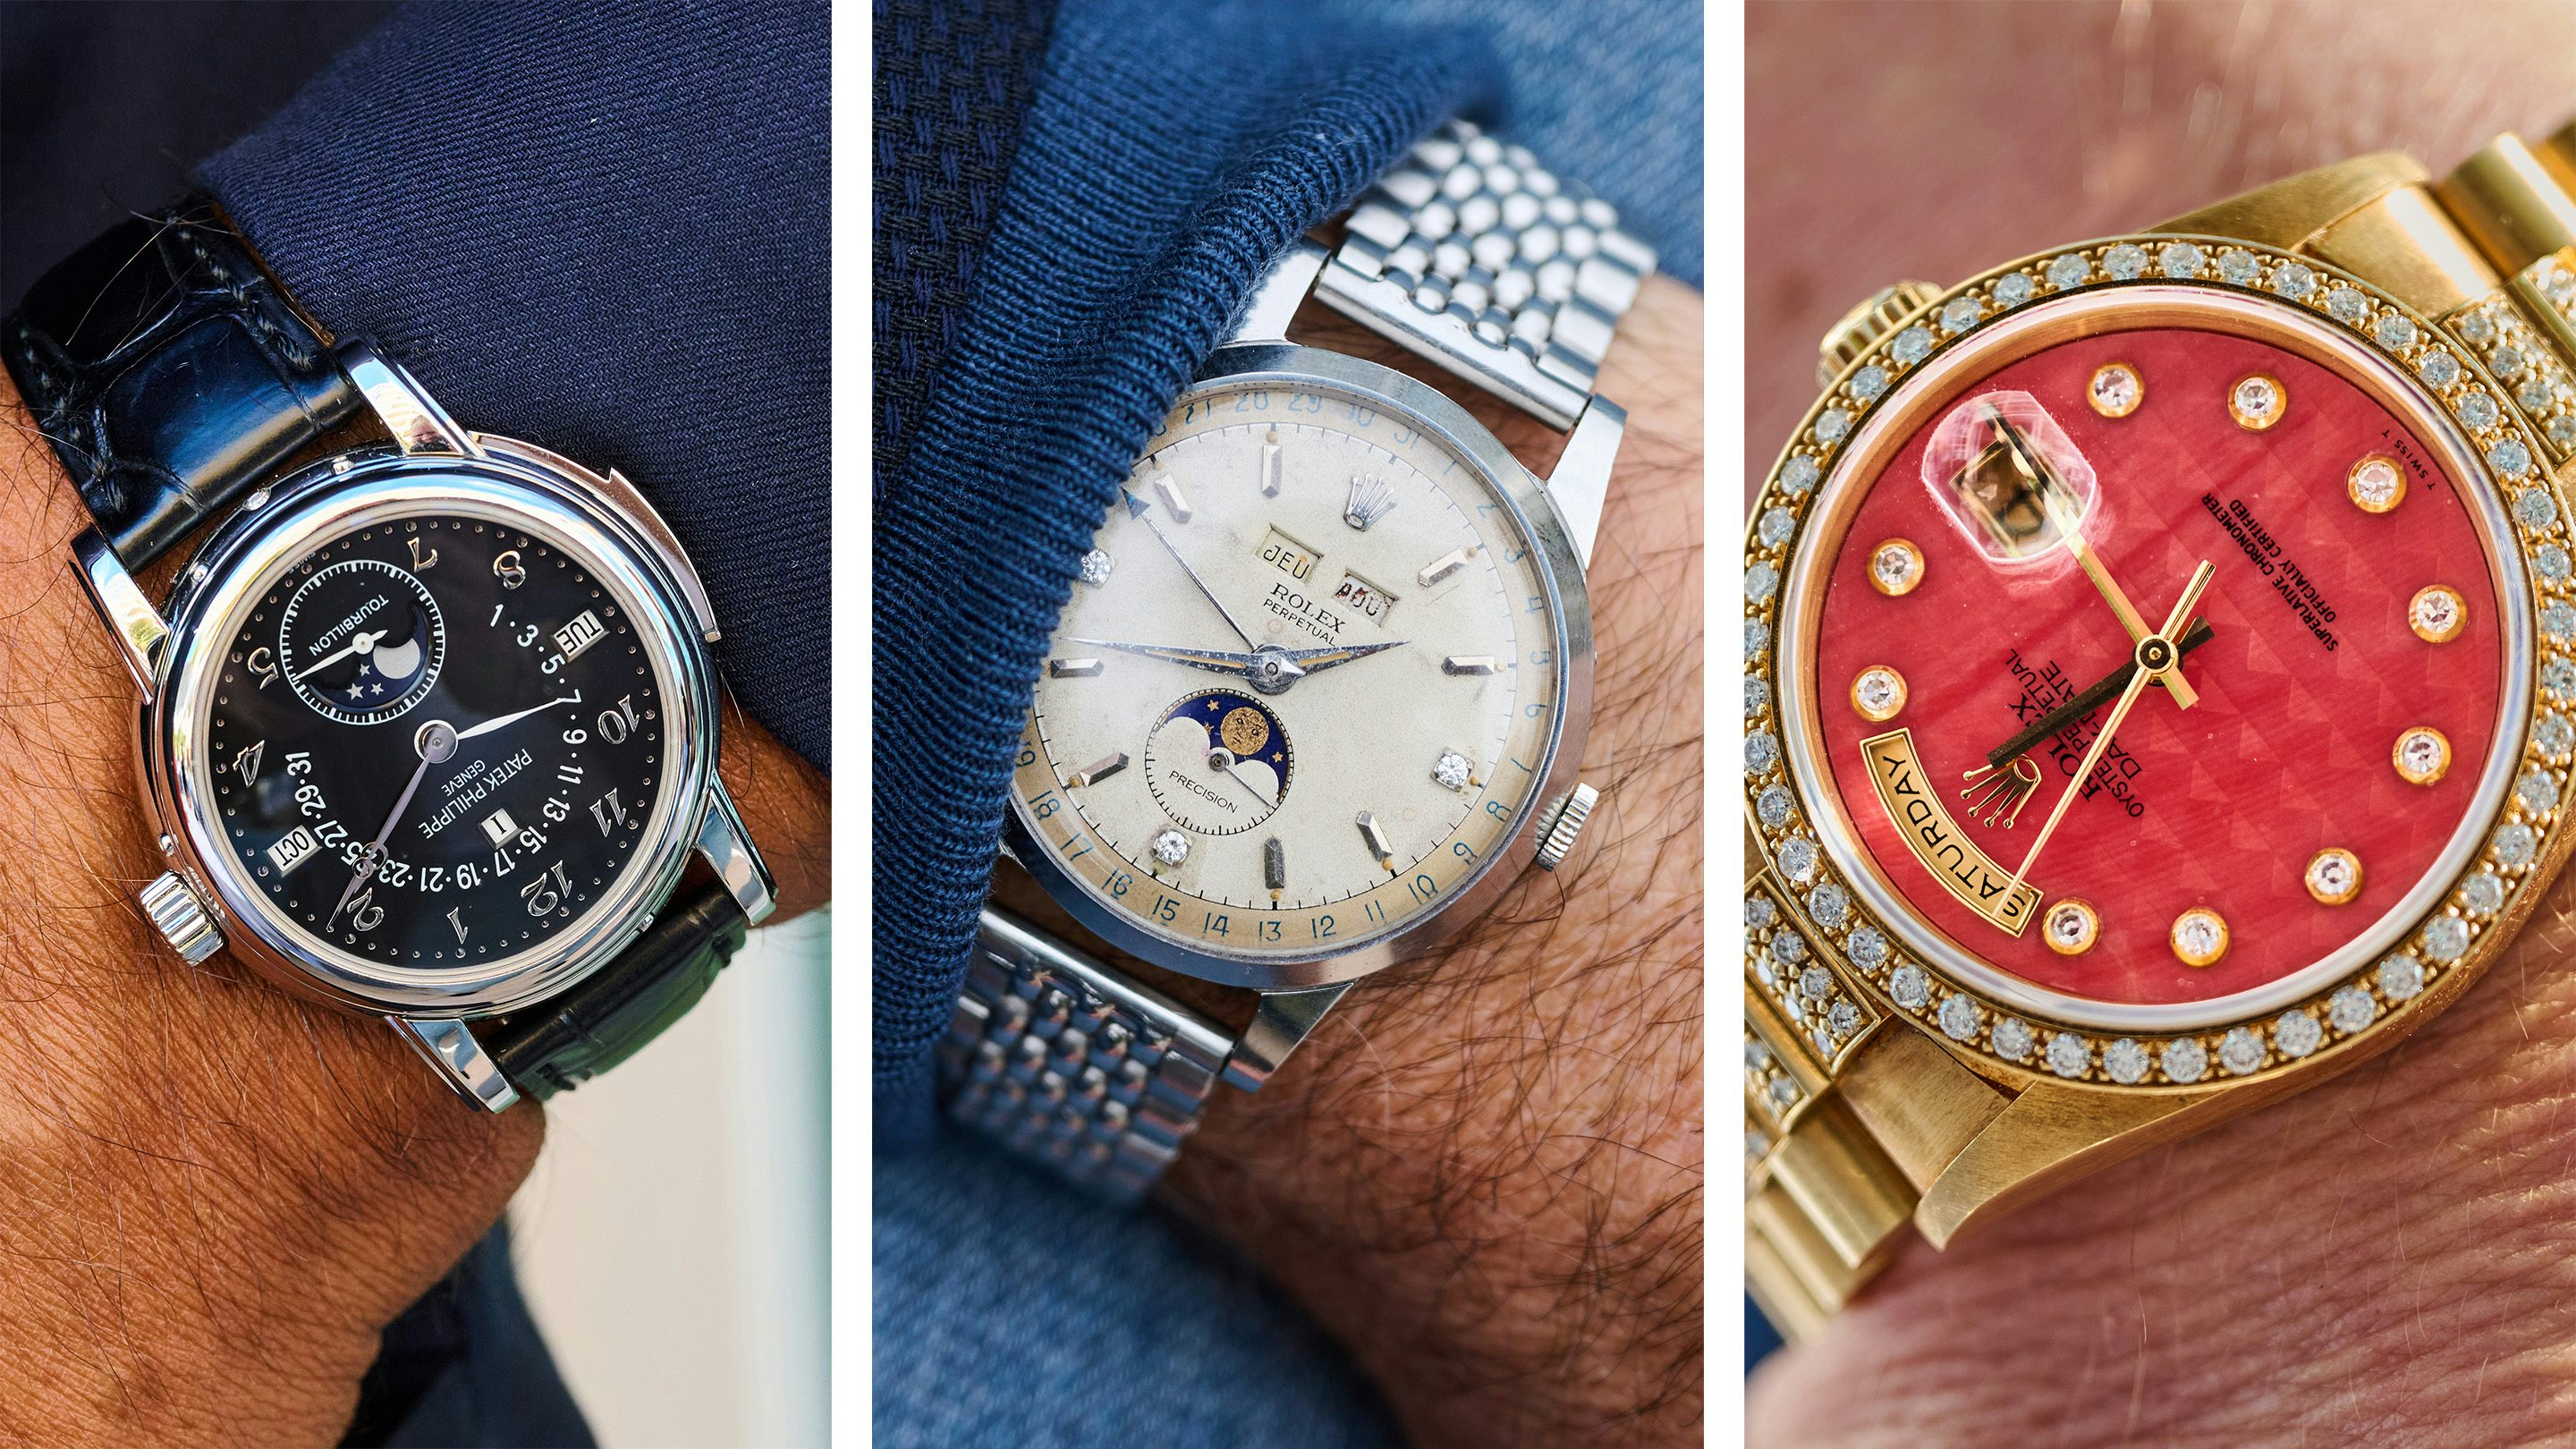 11 of the Most Expensive New Watches